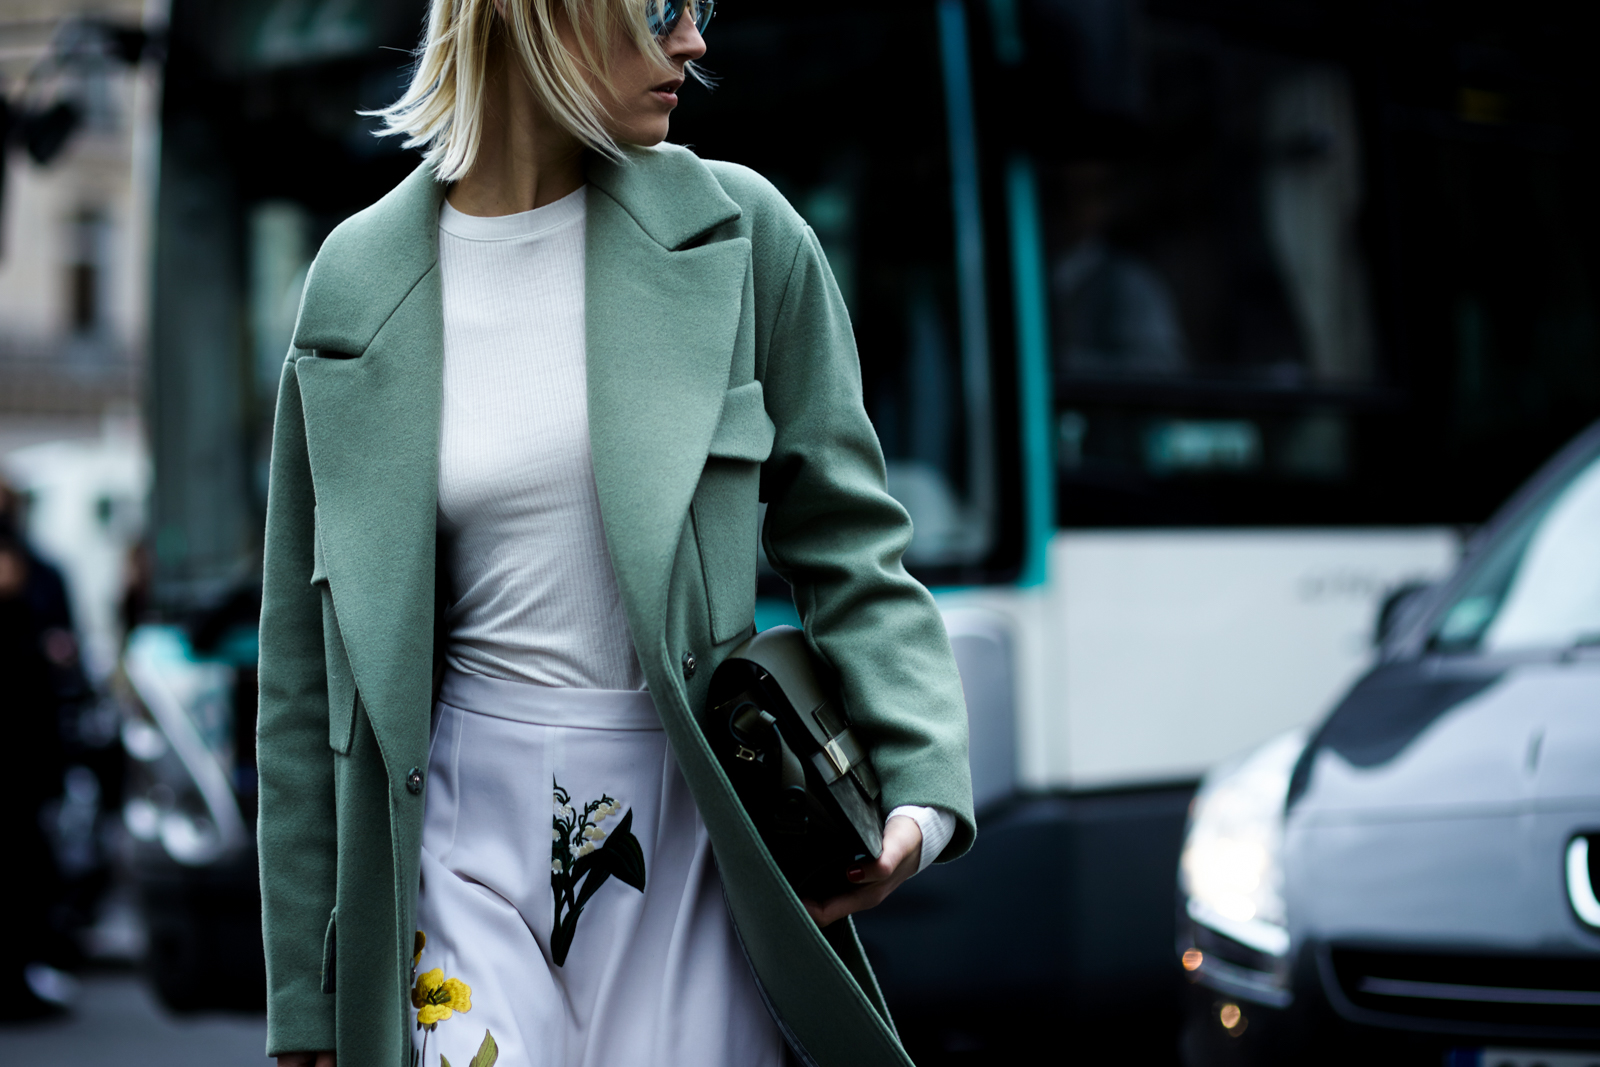 PFW Street Style: Fashion blogger Linda Tol wearing a green coat and printed pants before the Stella McCartney Fall 2016 fashion show in Paris, France